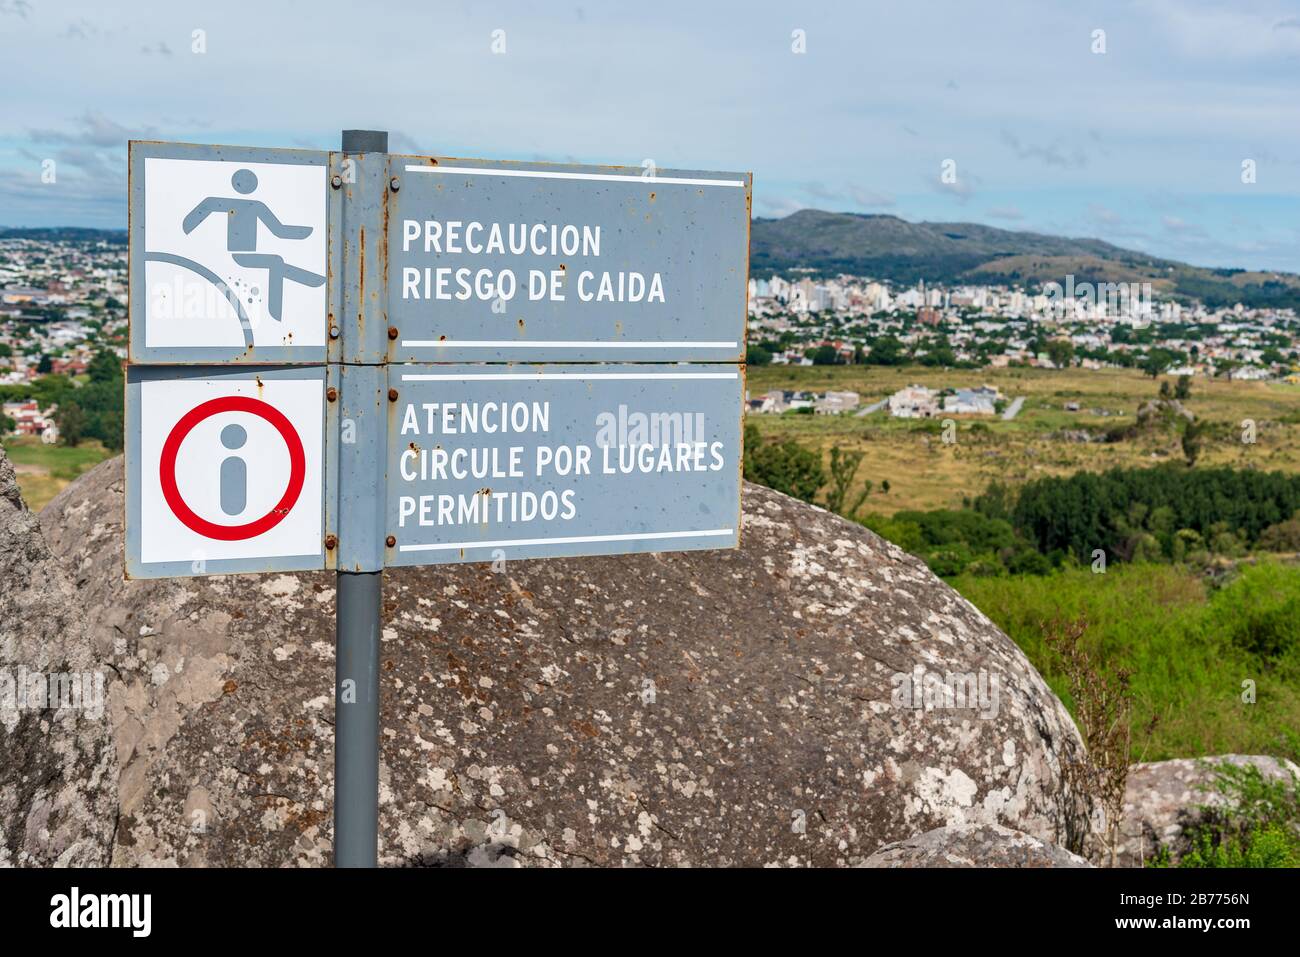 Warning signs of fall in spanish meaning 'Precaution risk of falling' and 'Attention circulate through allowed places', with a landscape of a city in Stock Photo